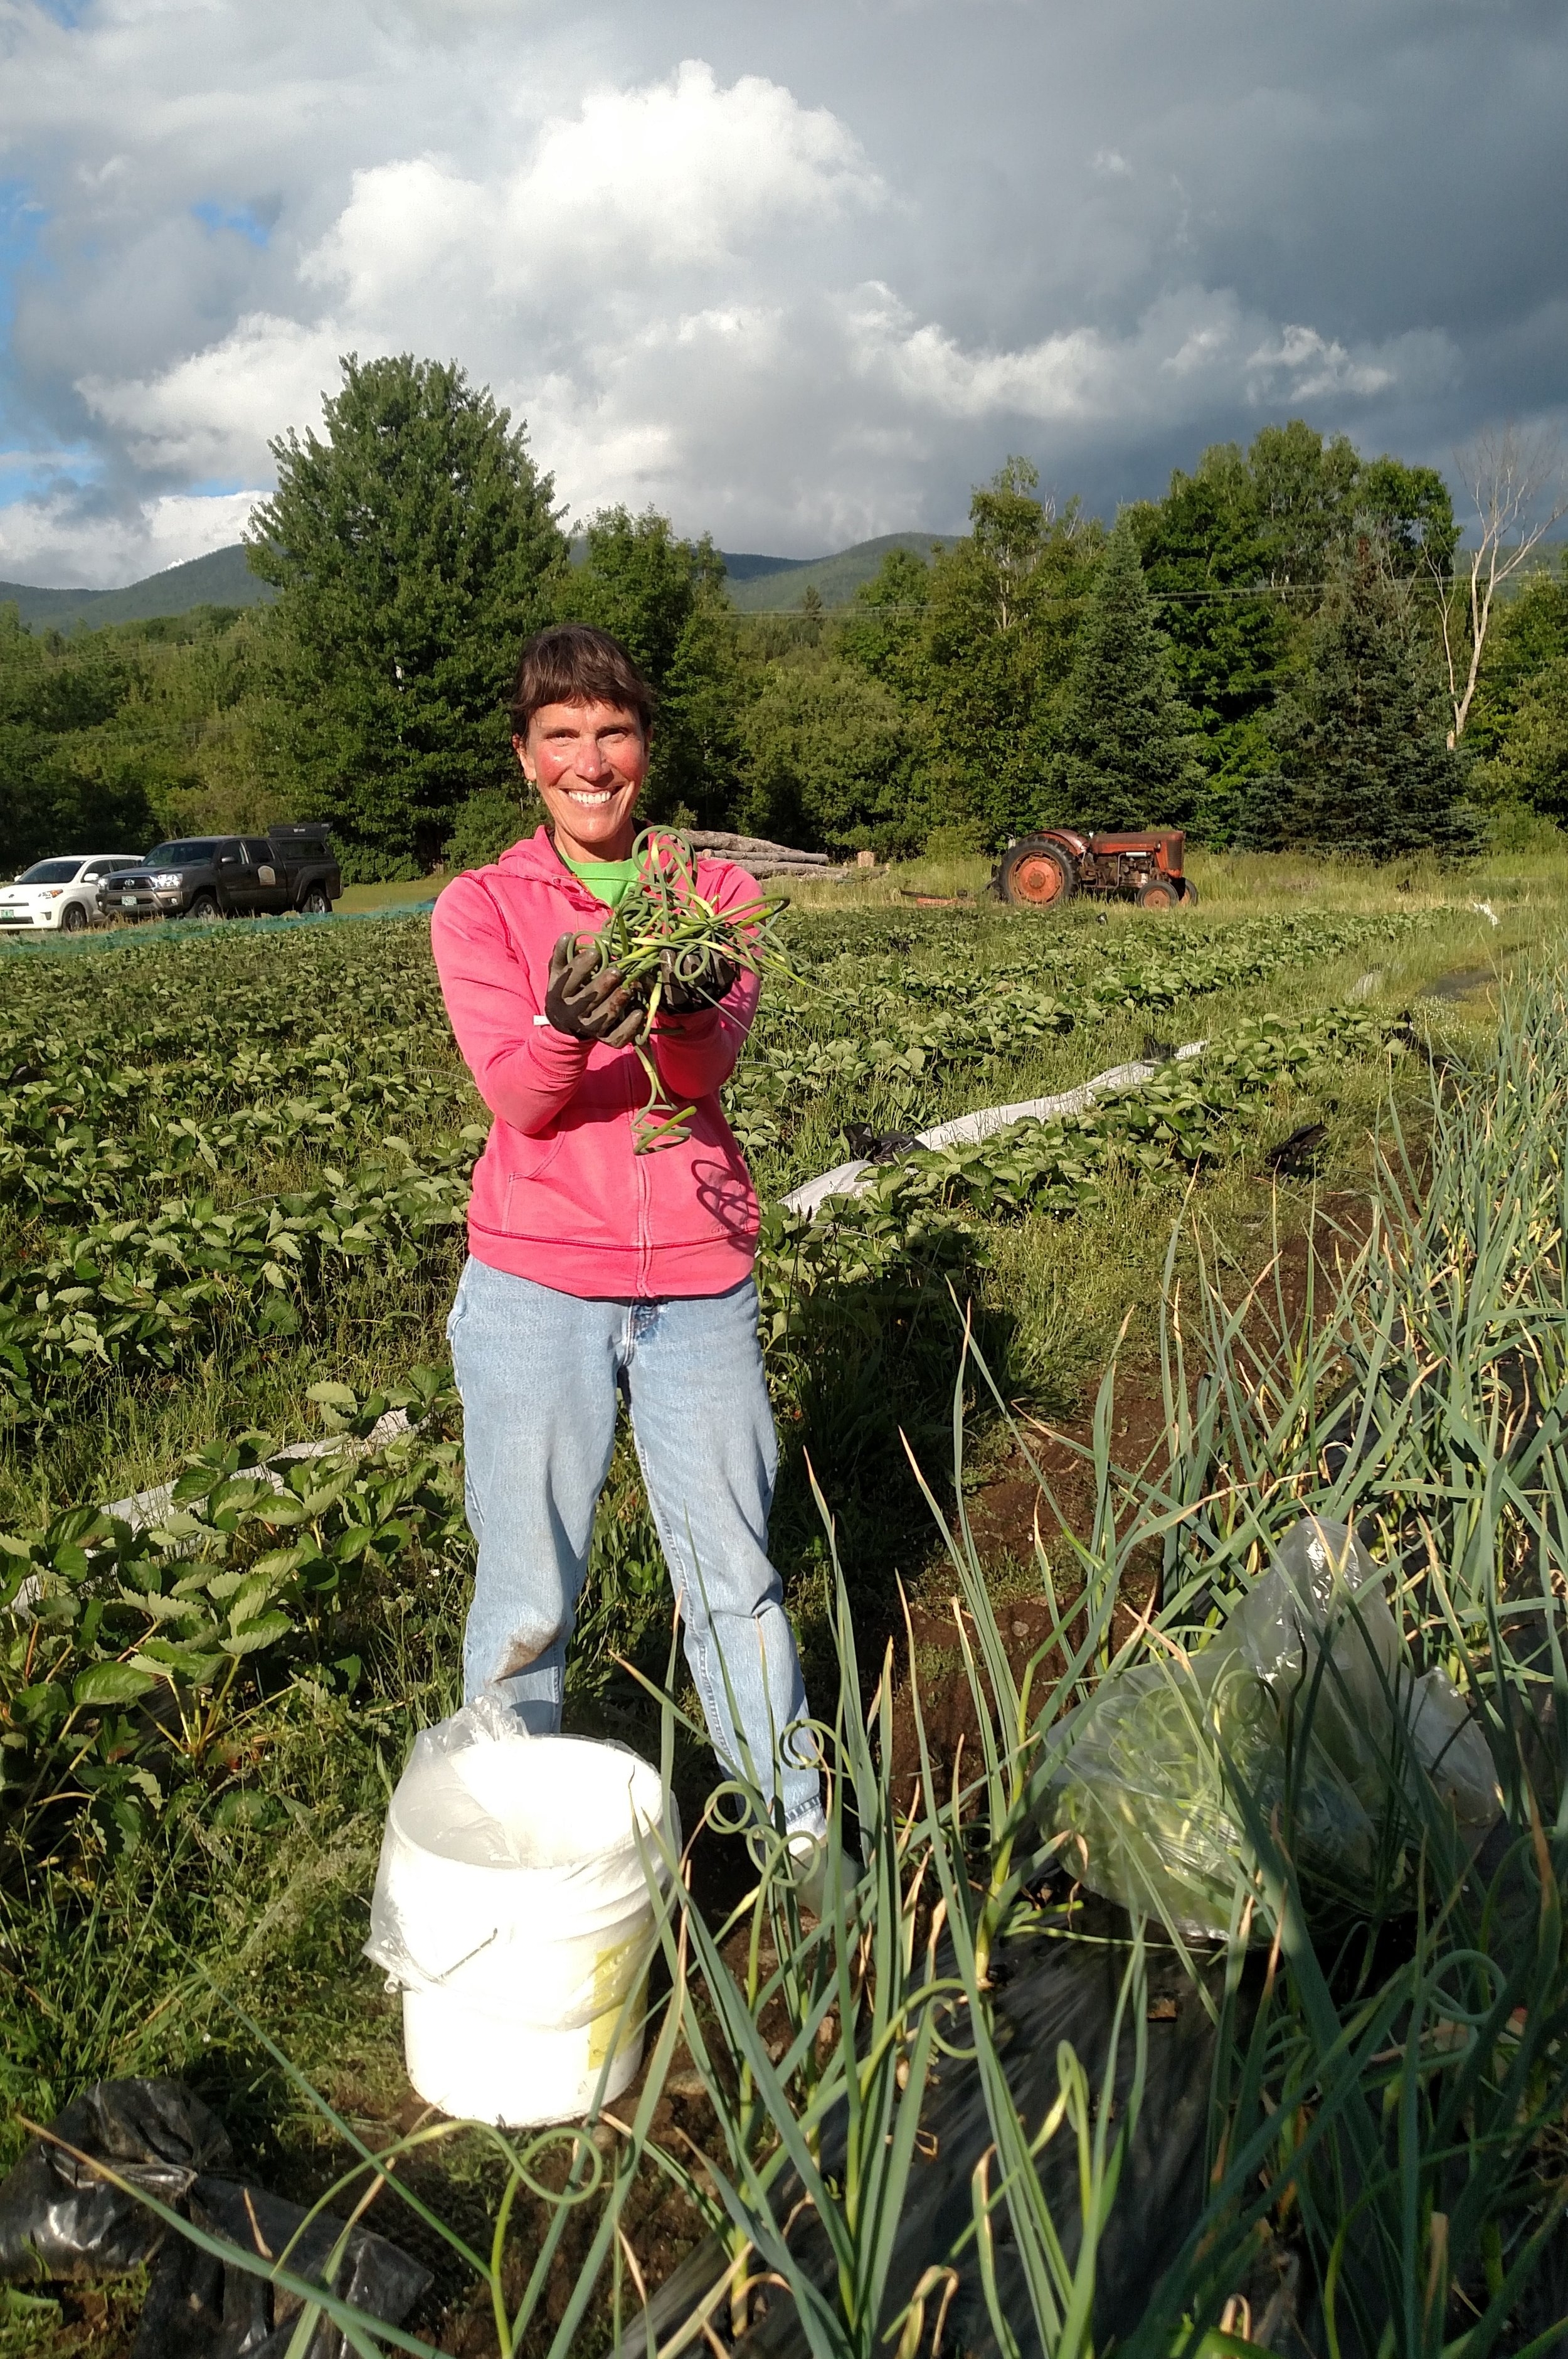 Gleaning garlic scapes sure is fun!